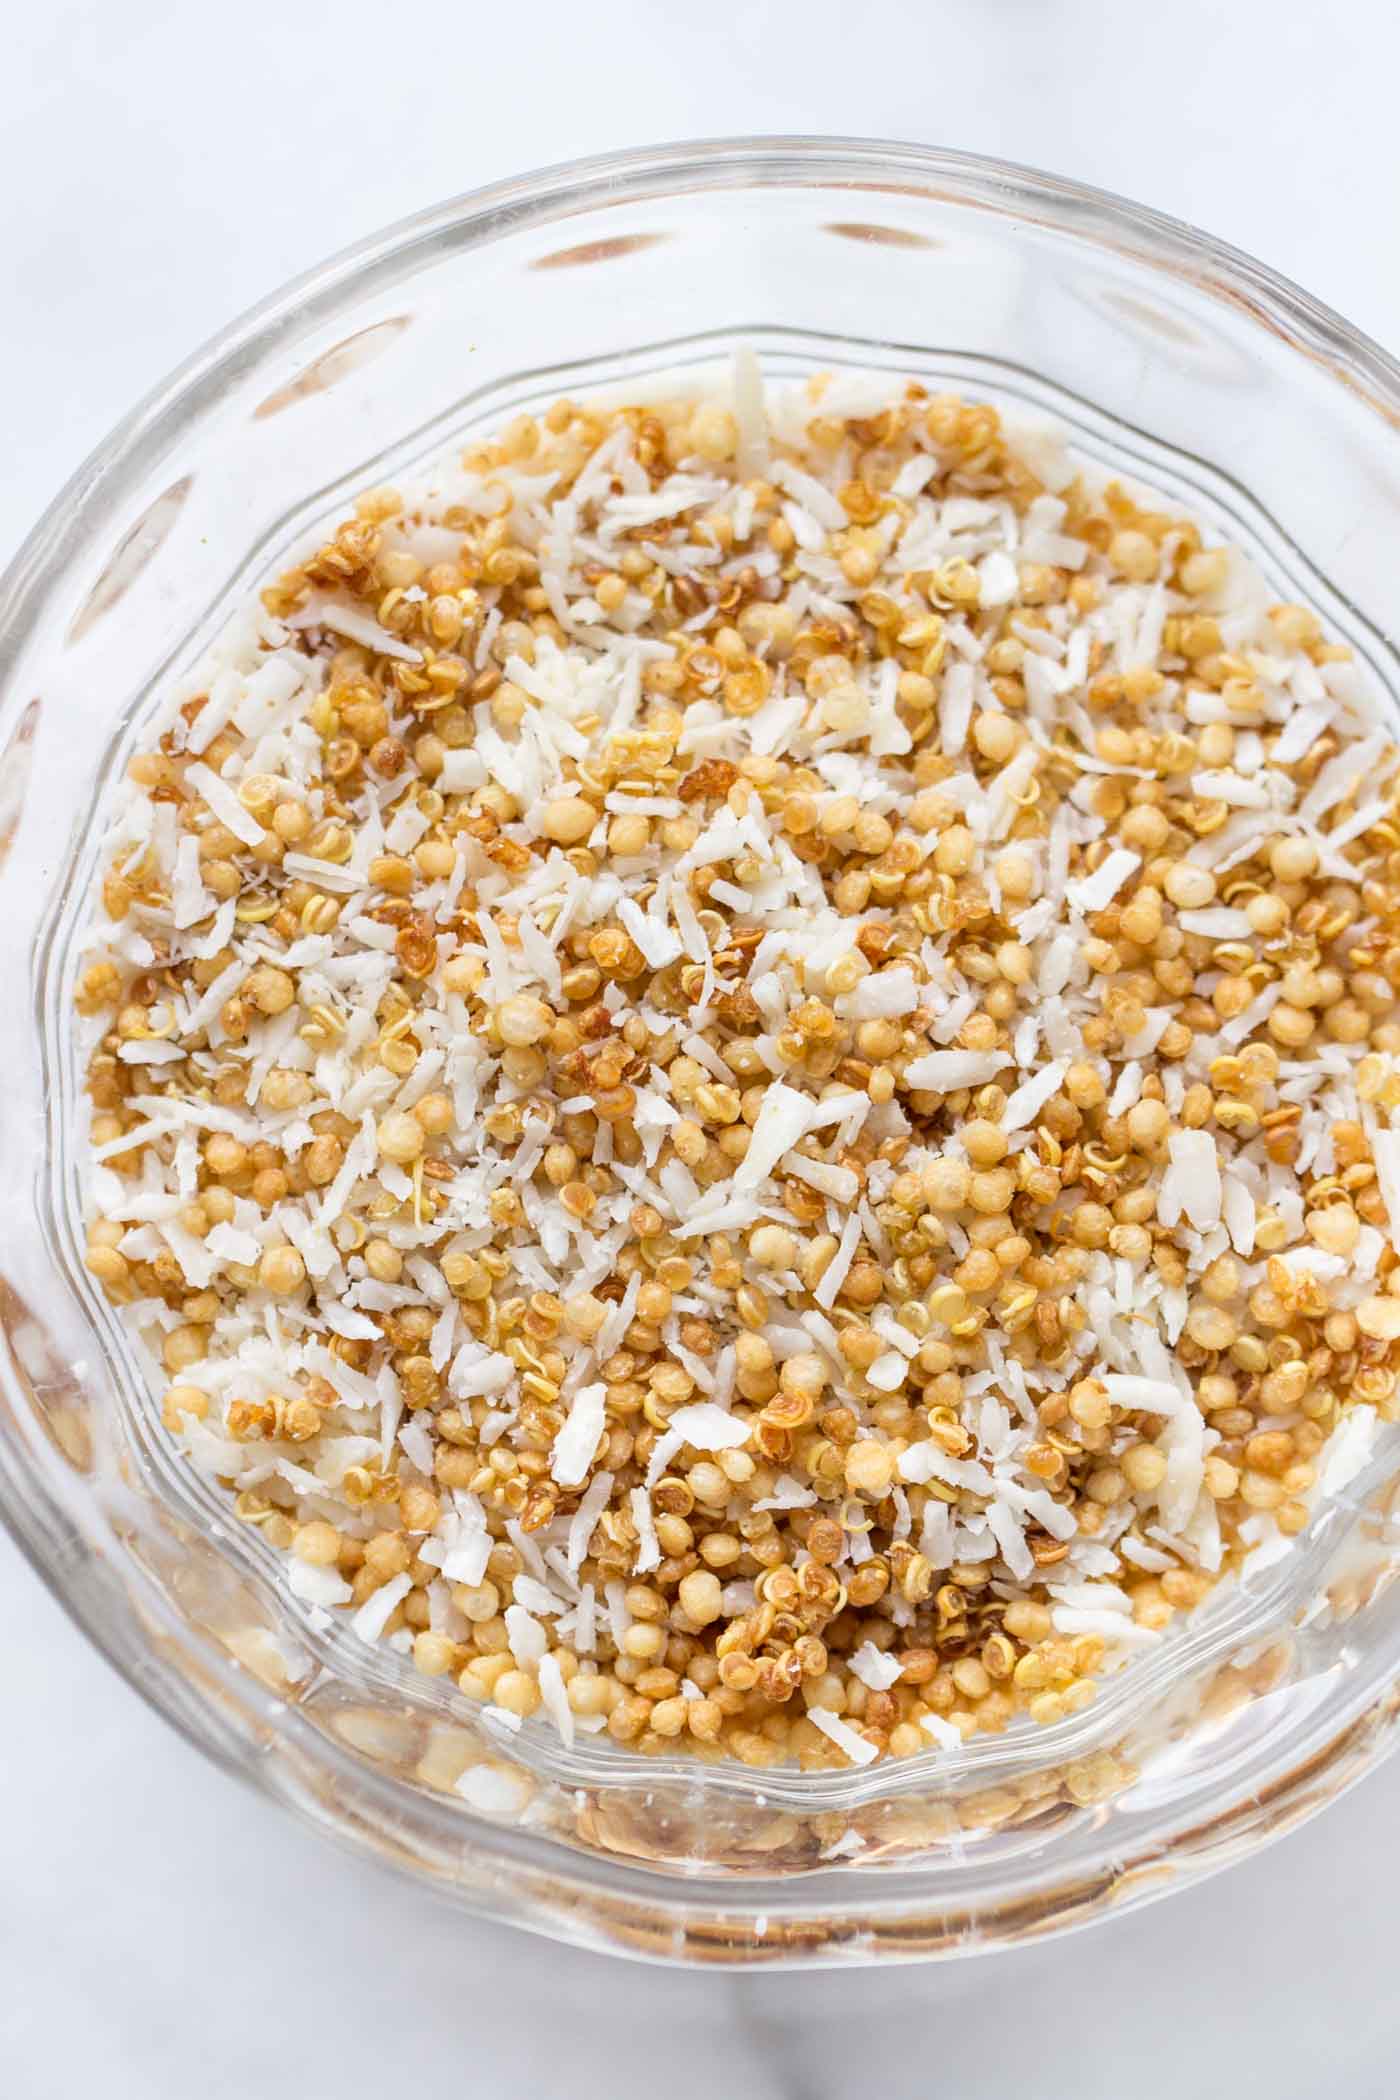 The perfect blend of ingredients to make vegan french toast: shredded coconut + quinoa crispies!